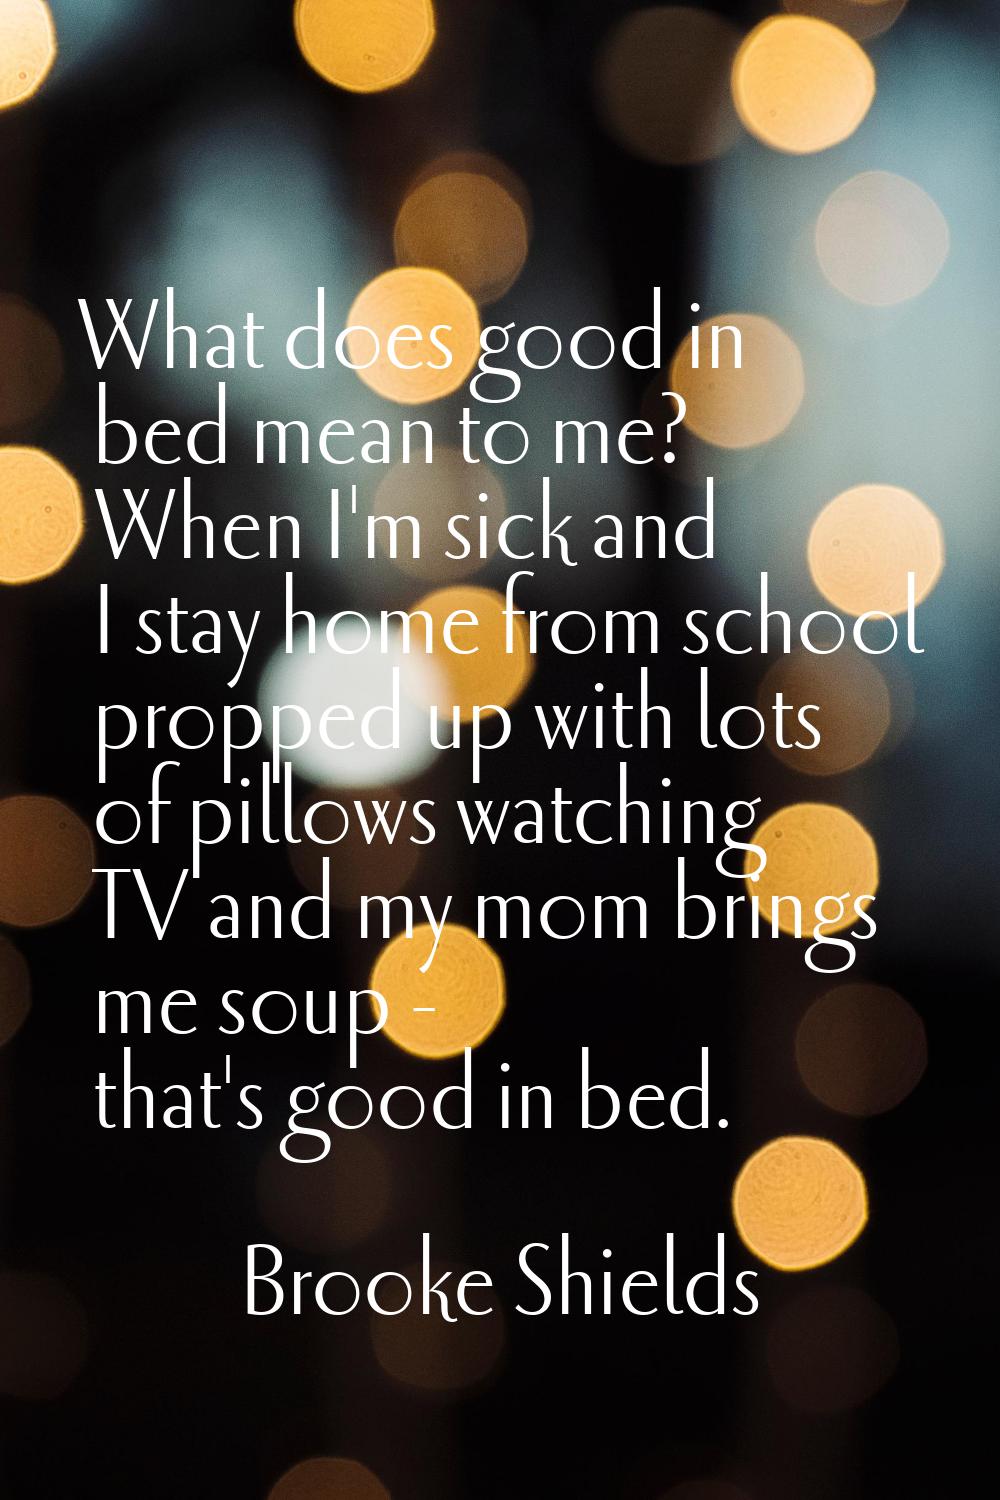 What does good in bed mean to me? When I'm sick and I stay home from school propped up with lots of